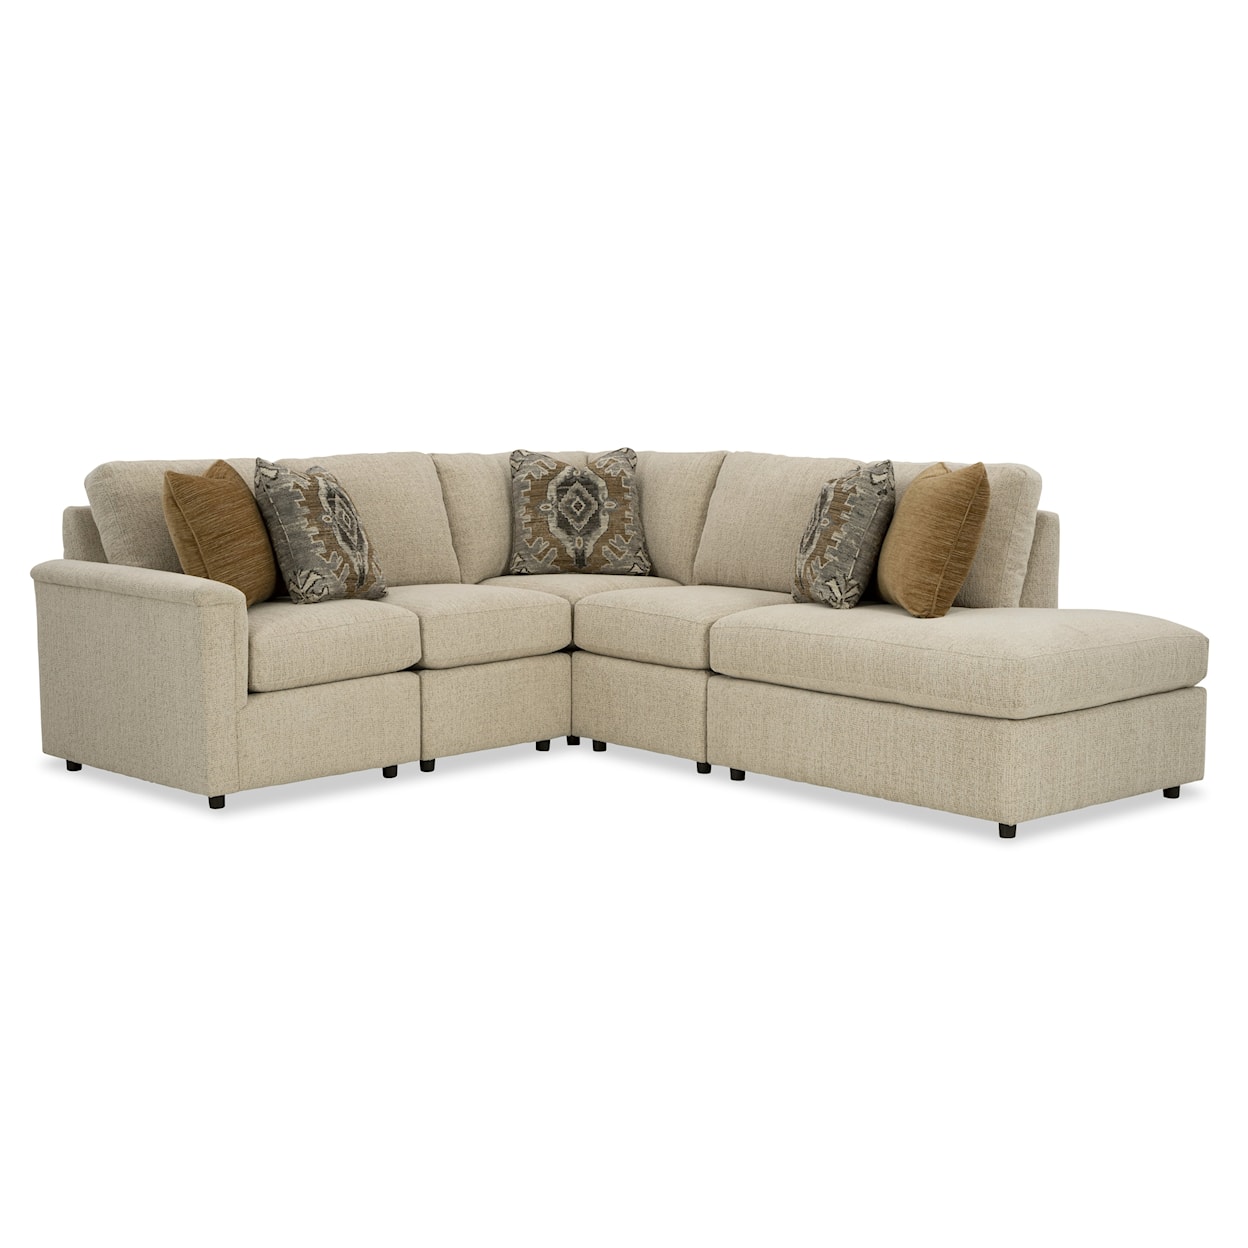 Craftmaster Hudson 5-Piece Sectional with Right Chaise